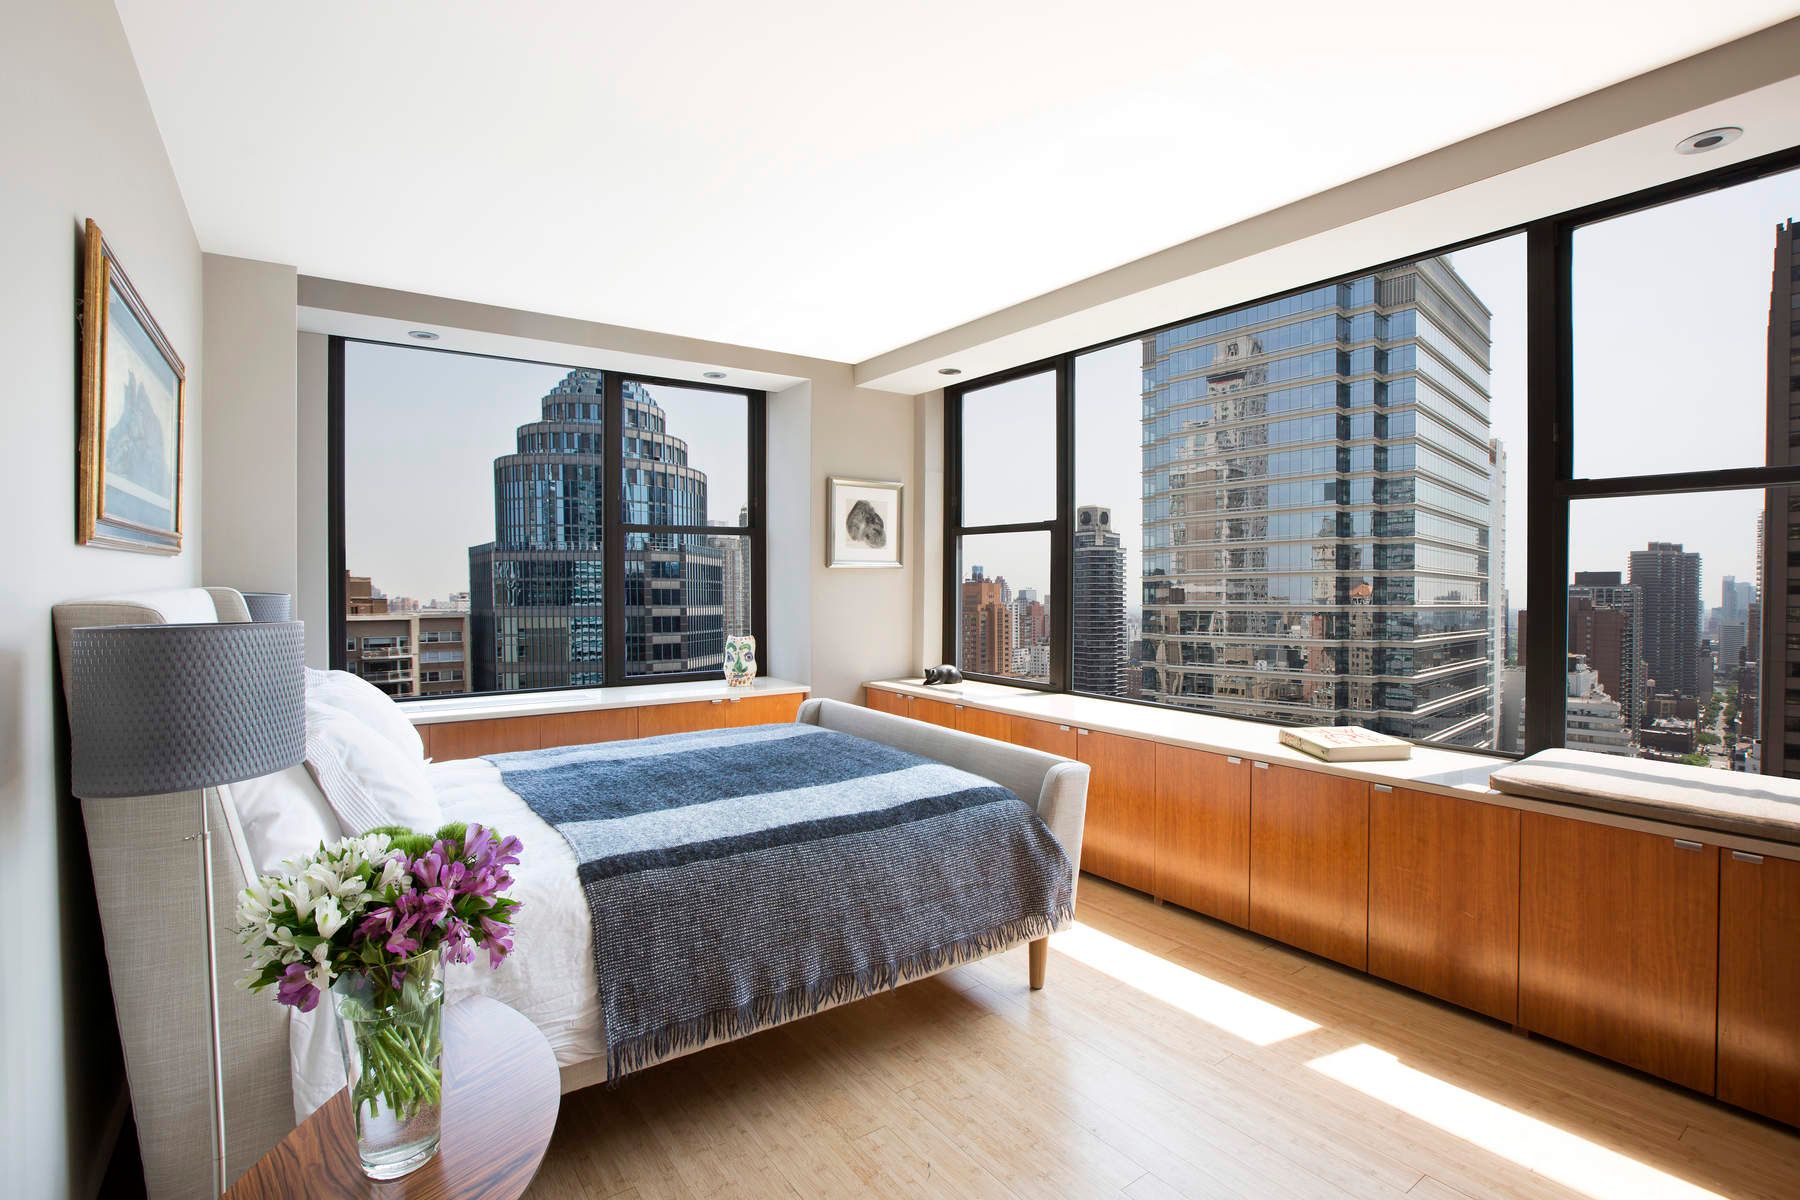 Martine Capdevielle_Luxury Real Estate NYC_117 EAST 57TH STREET APT 34h3.jpg